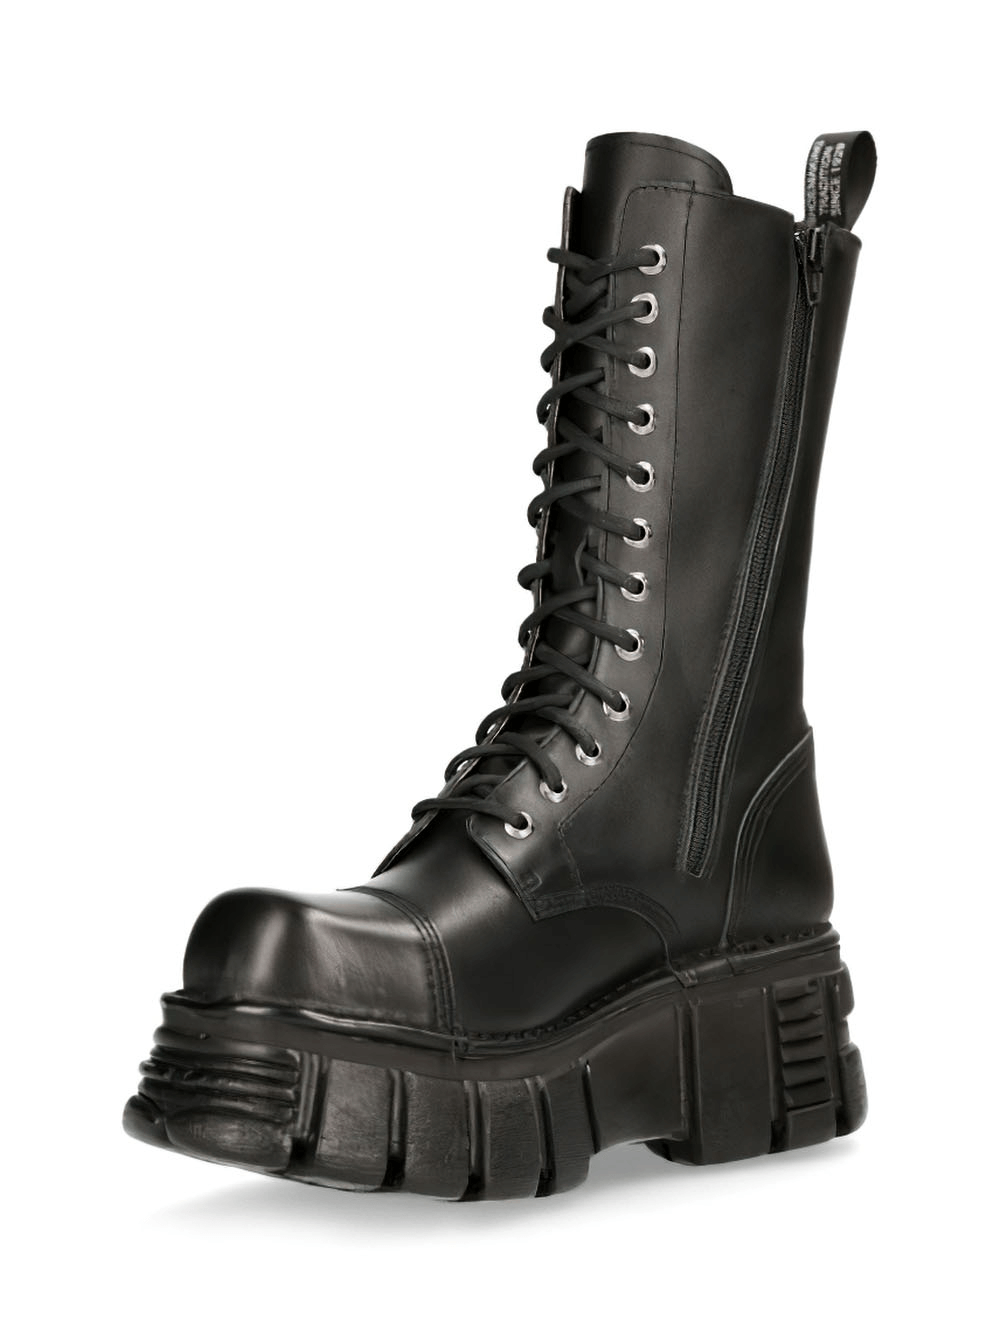 NEW ROCK Leather Military High Boots with Metallic Details